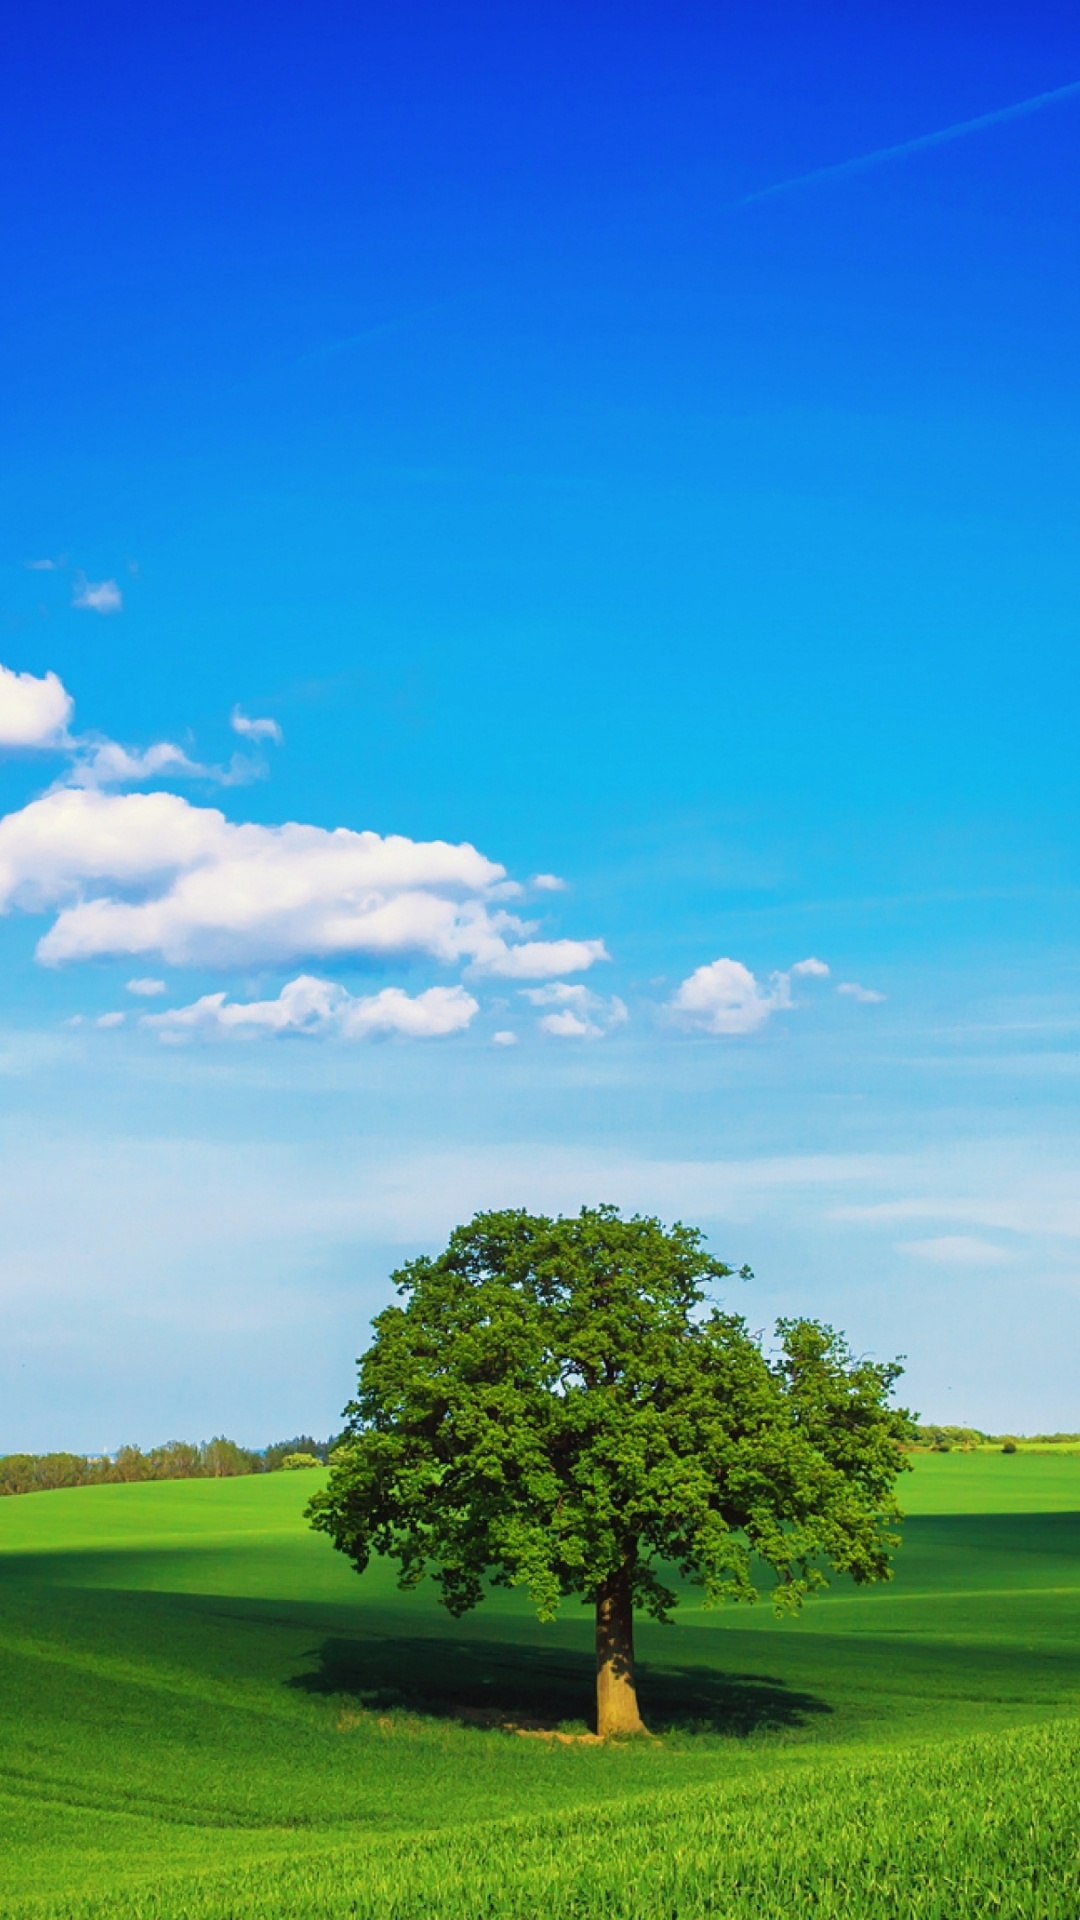 Green Tree on Green Grass Field Under Blue Sky During Daytime. Wallpaper in 1080x1920 Resolution